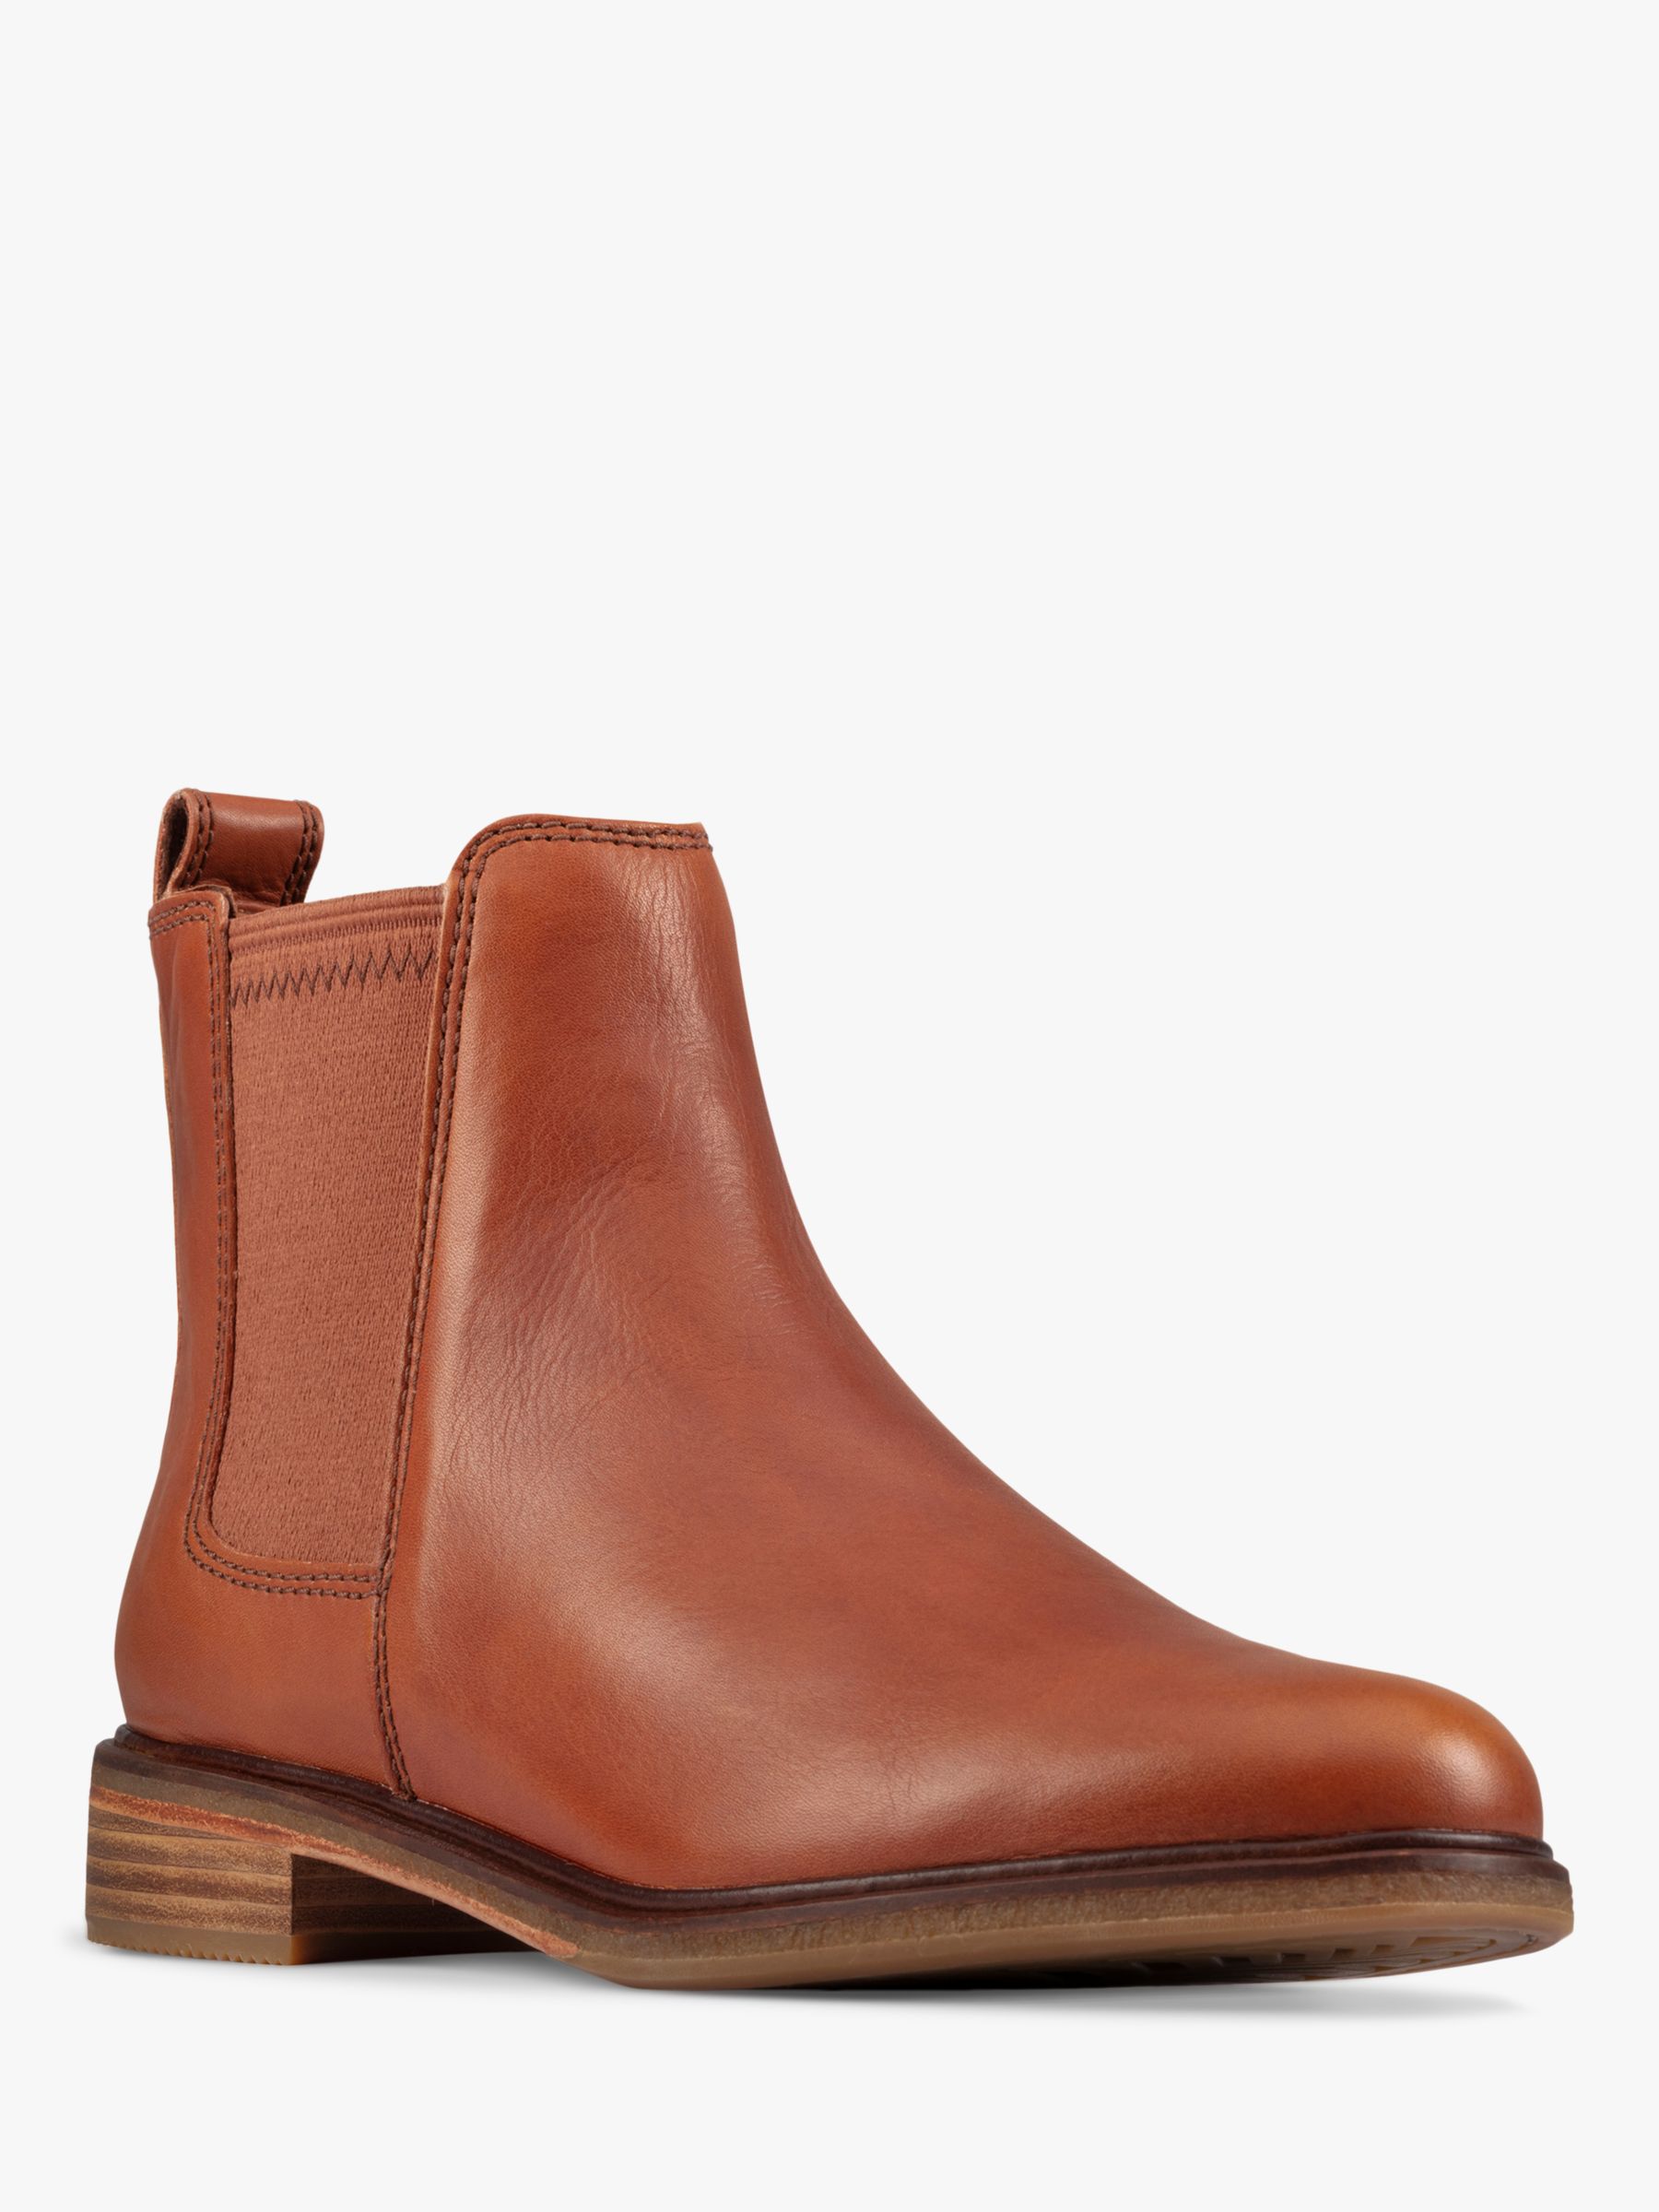 Clarks Clarkdale Arlo Leather Chelsea Boots, Tan at John Lewis & Partners